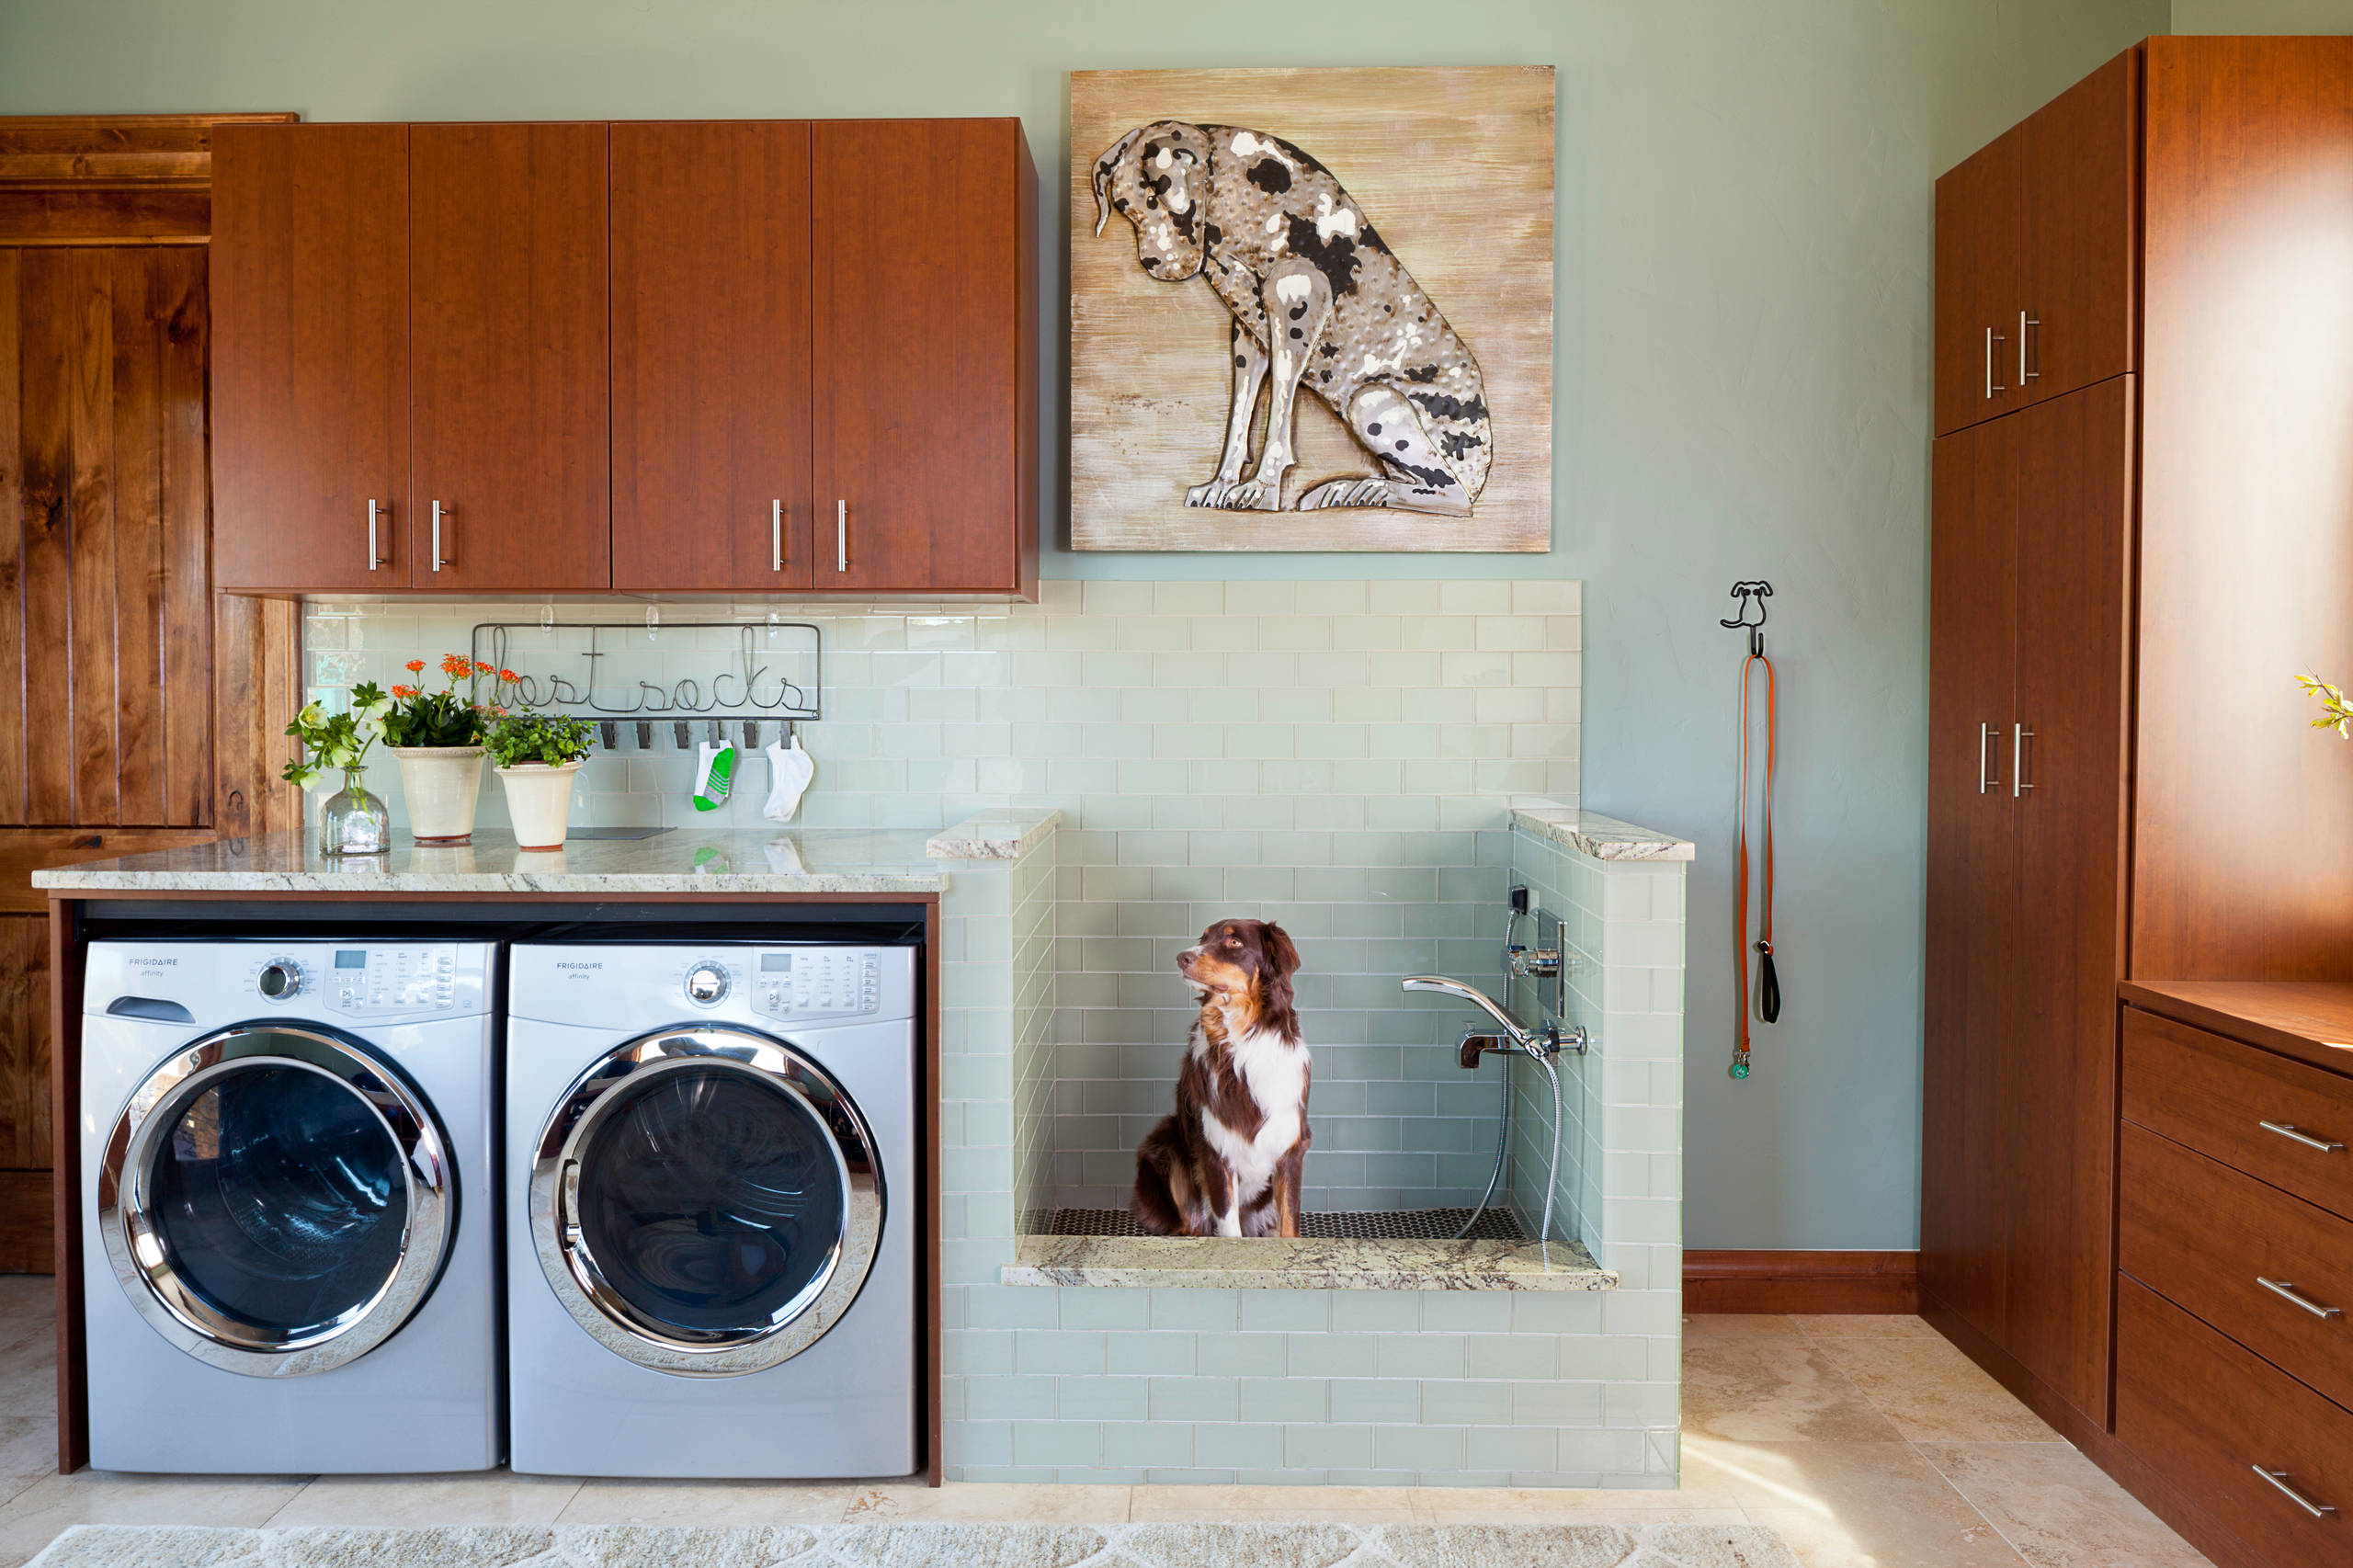 75 Rustic Laundry Room Ideas You'll Love - August, 2023 | Houzz